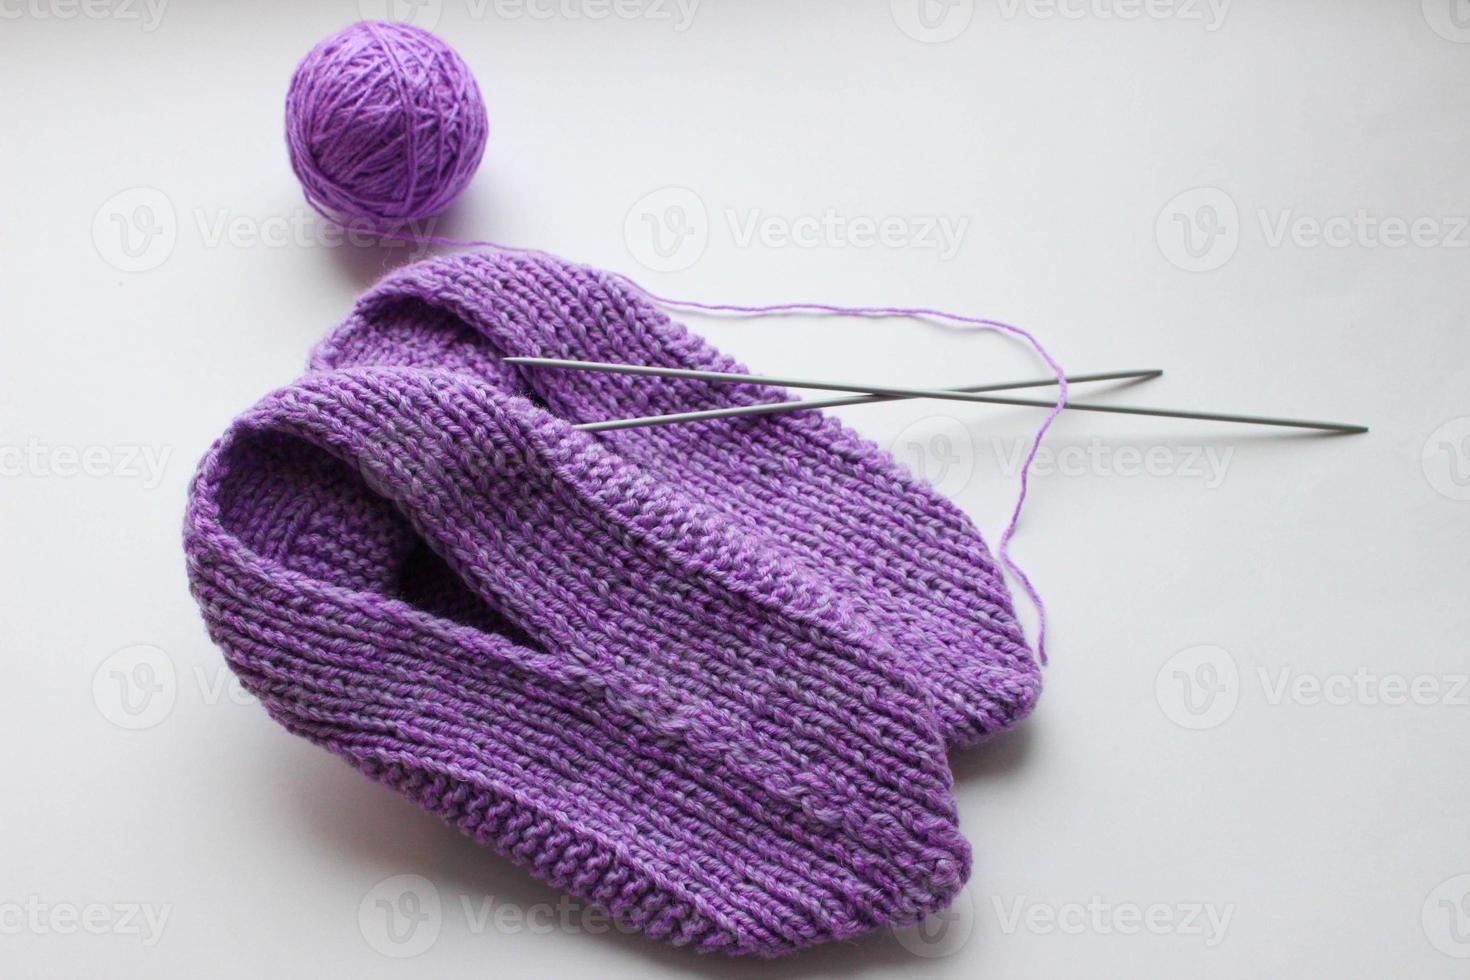 Handmade knitted pink slippers with knitting needles and ball of yarn on white background photo